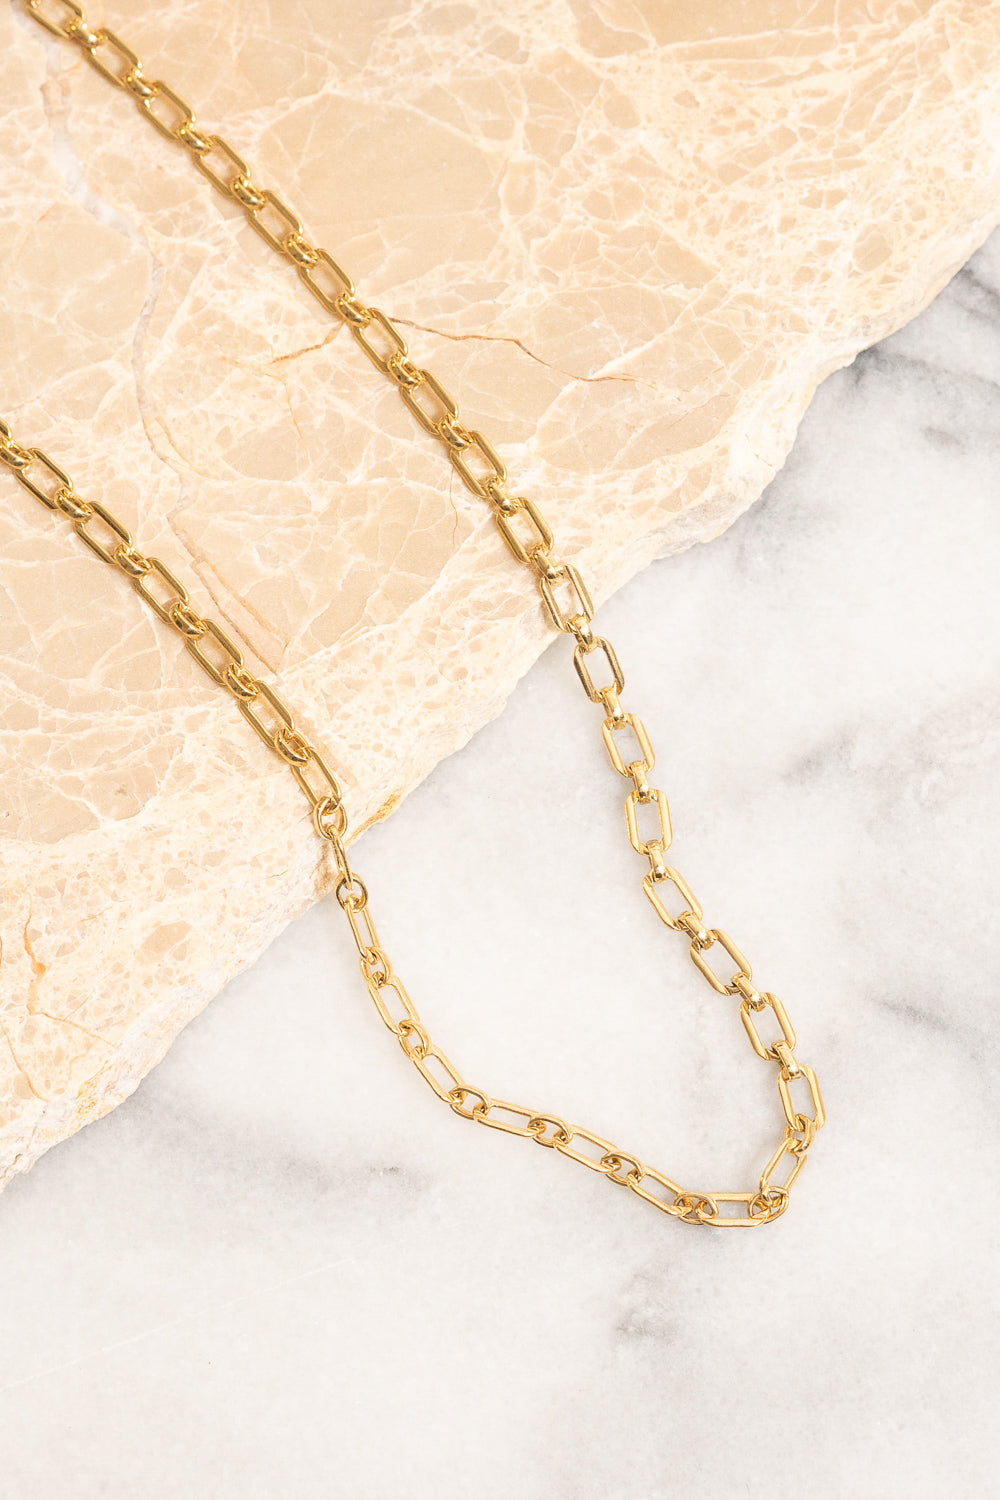 vintage style gold chain necklace